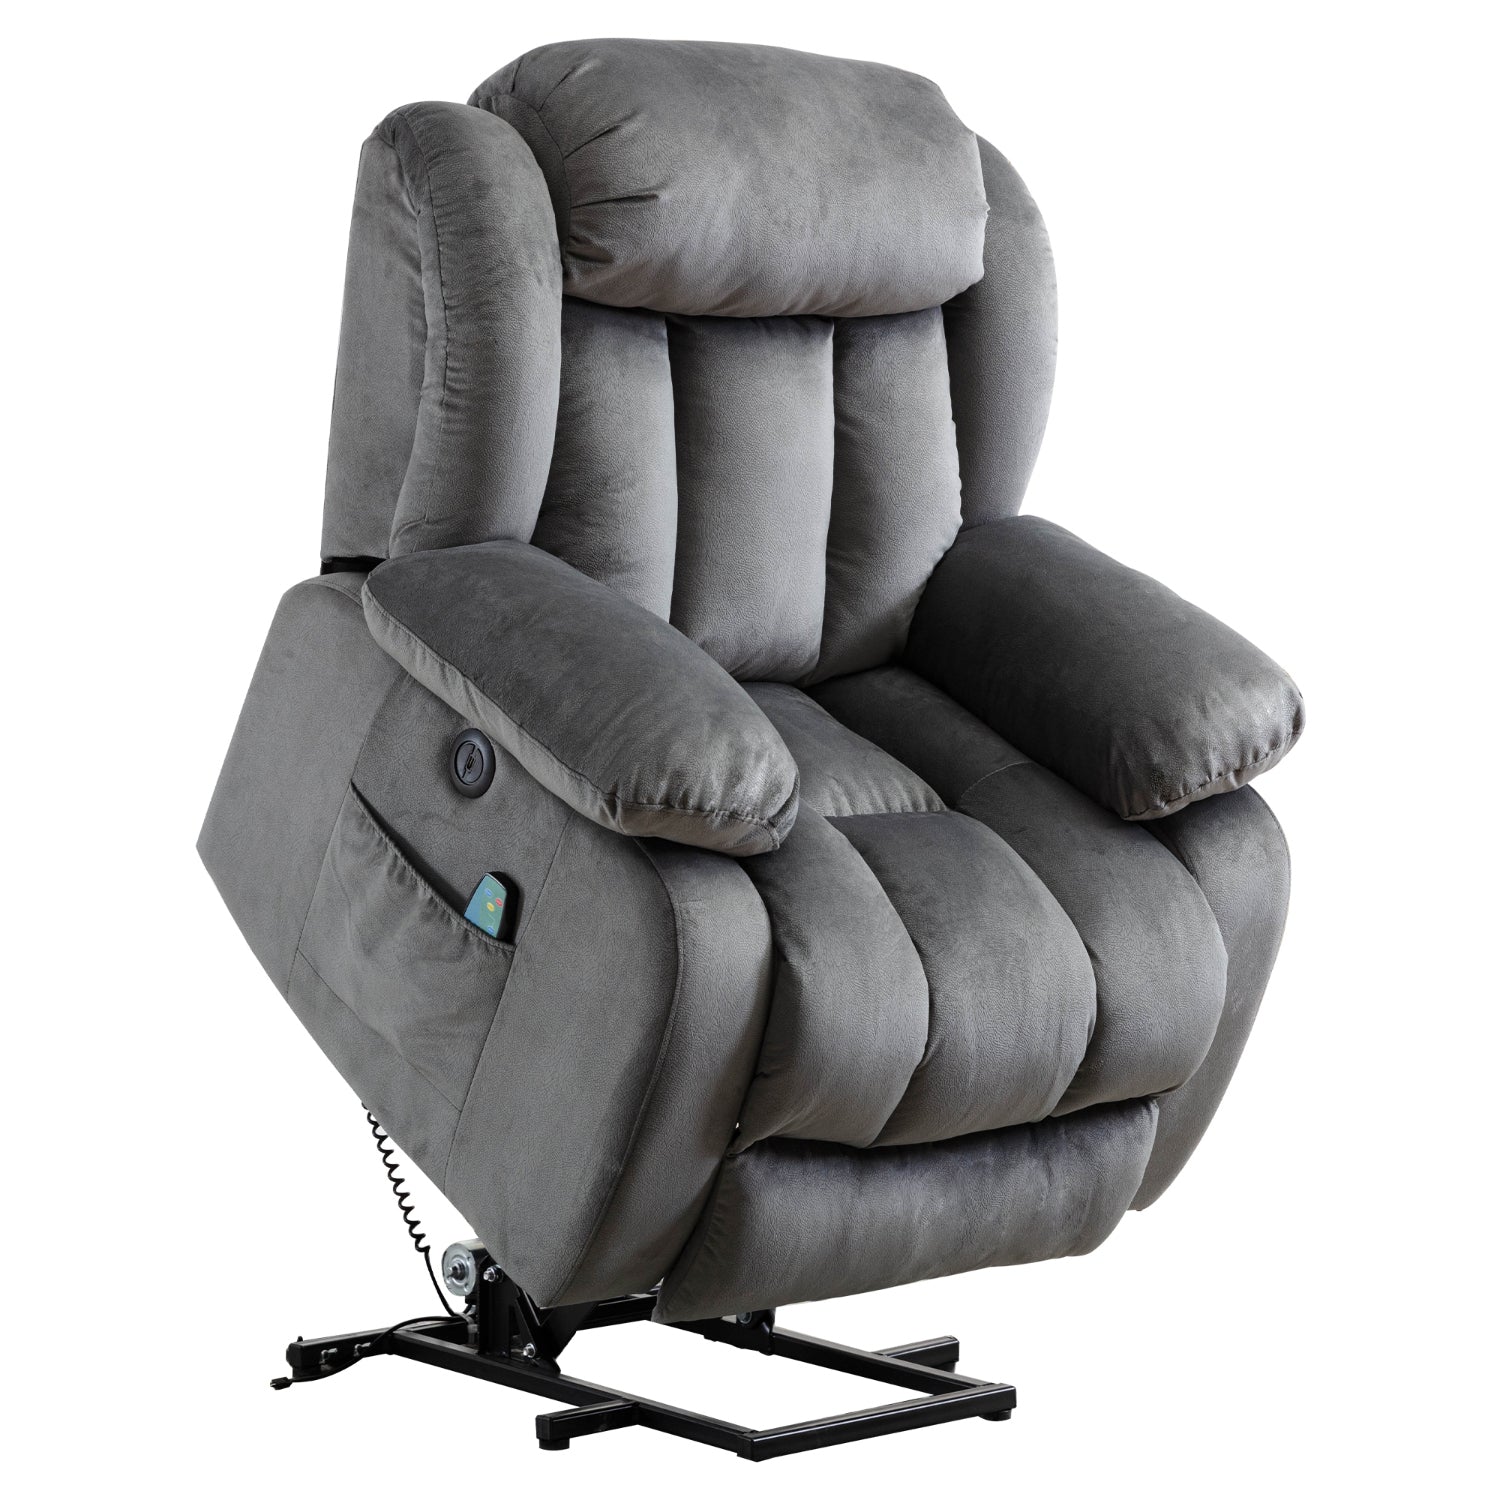 Carter Gray Oversized Power Lift Recliner With Vibration Massage and Heat